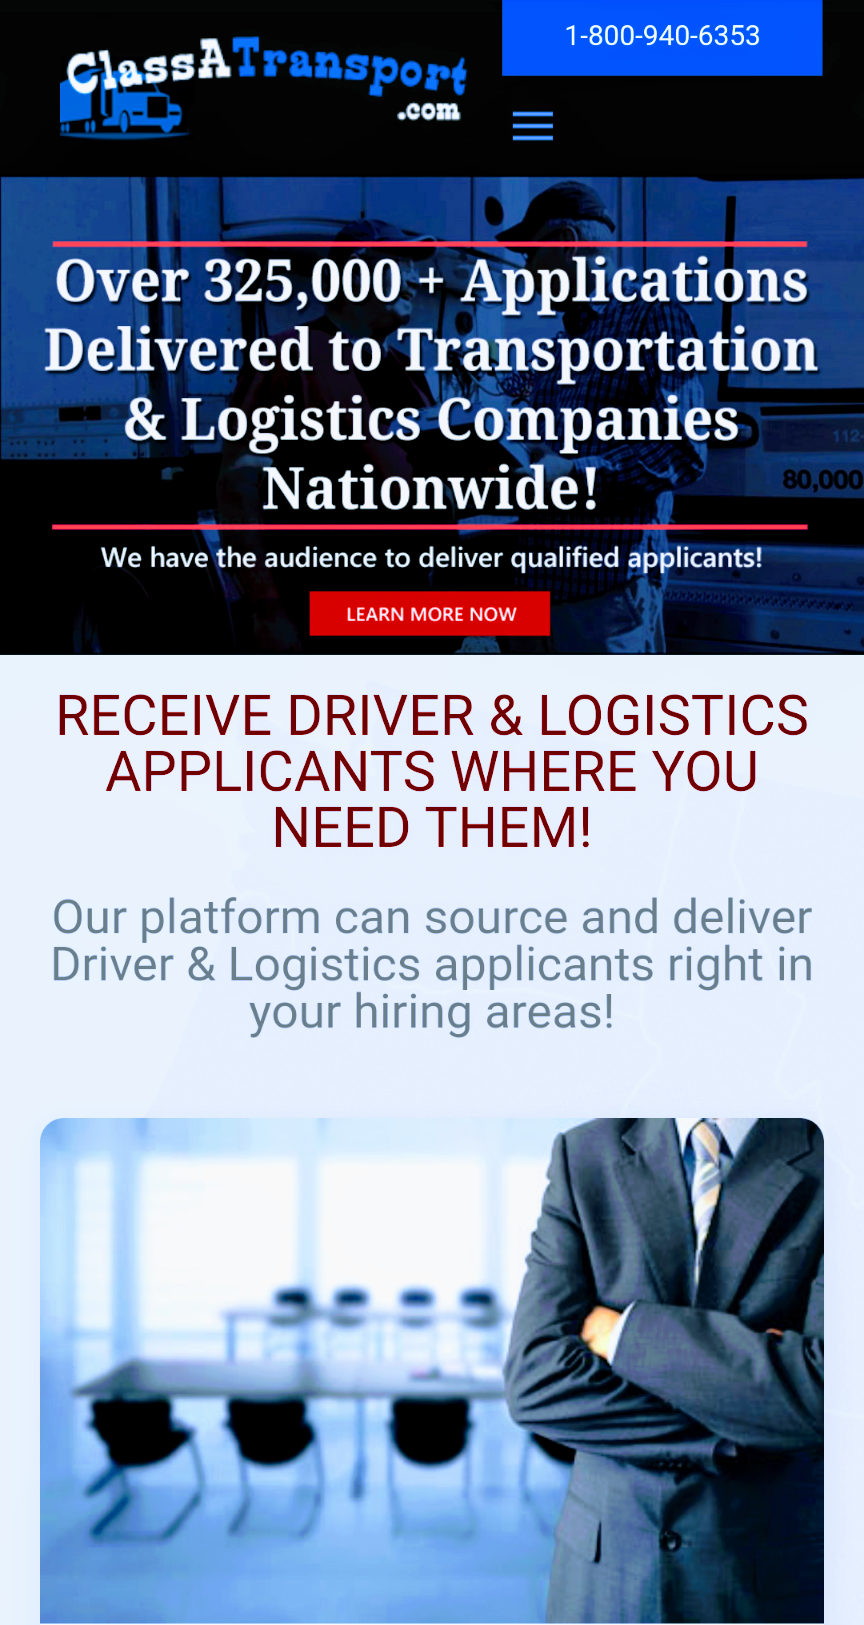 Recruiting CDL Truck Driver Company Solutions  and services offered by ClassATransport.com